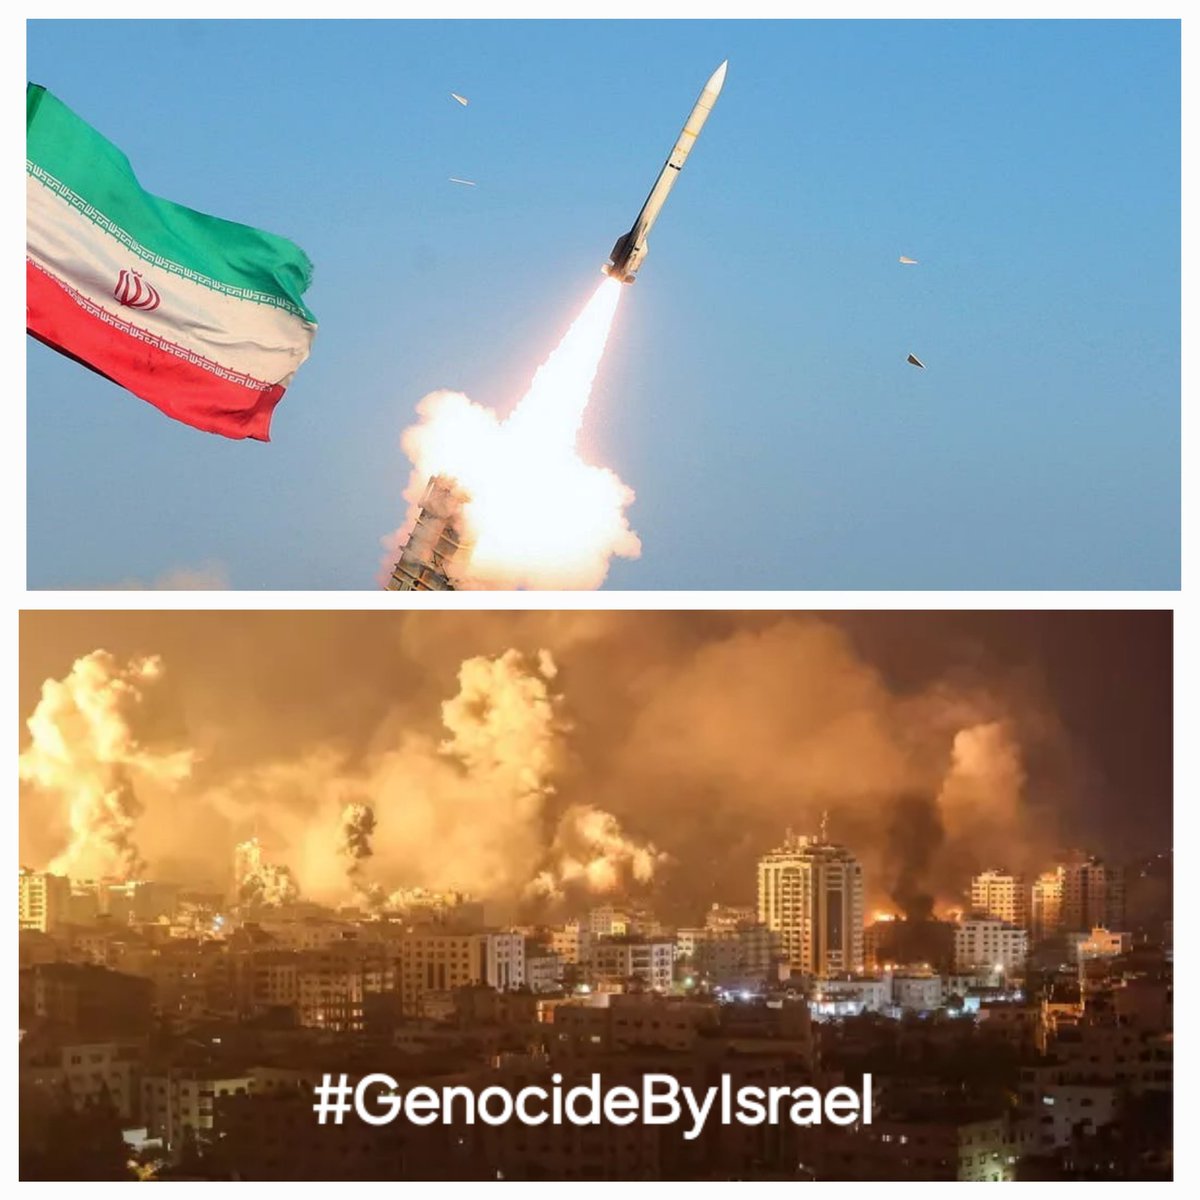 Why is it that Iran's inevitable 𝙍𝙀𝙏𝘼𝙇𝙄𝘼𝙏𝙊𝙍𝙔 Attack on Israel is being frowned upon and promoted as an opener to a nuclear war but Israel's 75 years of theft and murder the latest of which is a #GenocideByIsrael taking the lives of more than 37K civilians in #Gaza half…